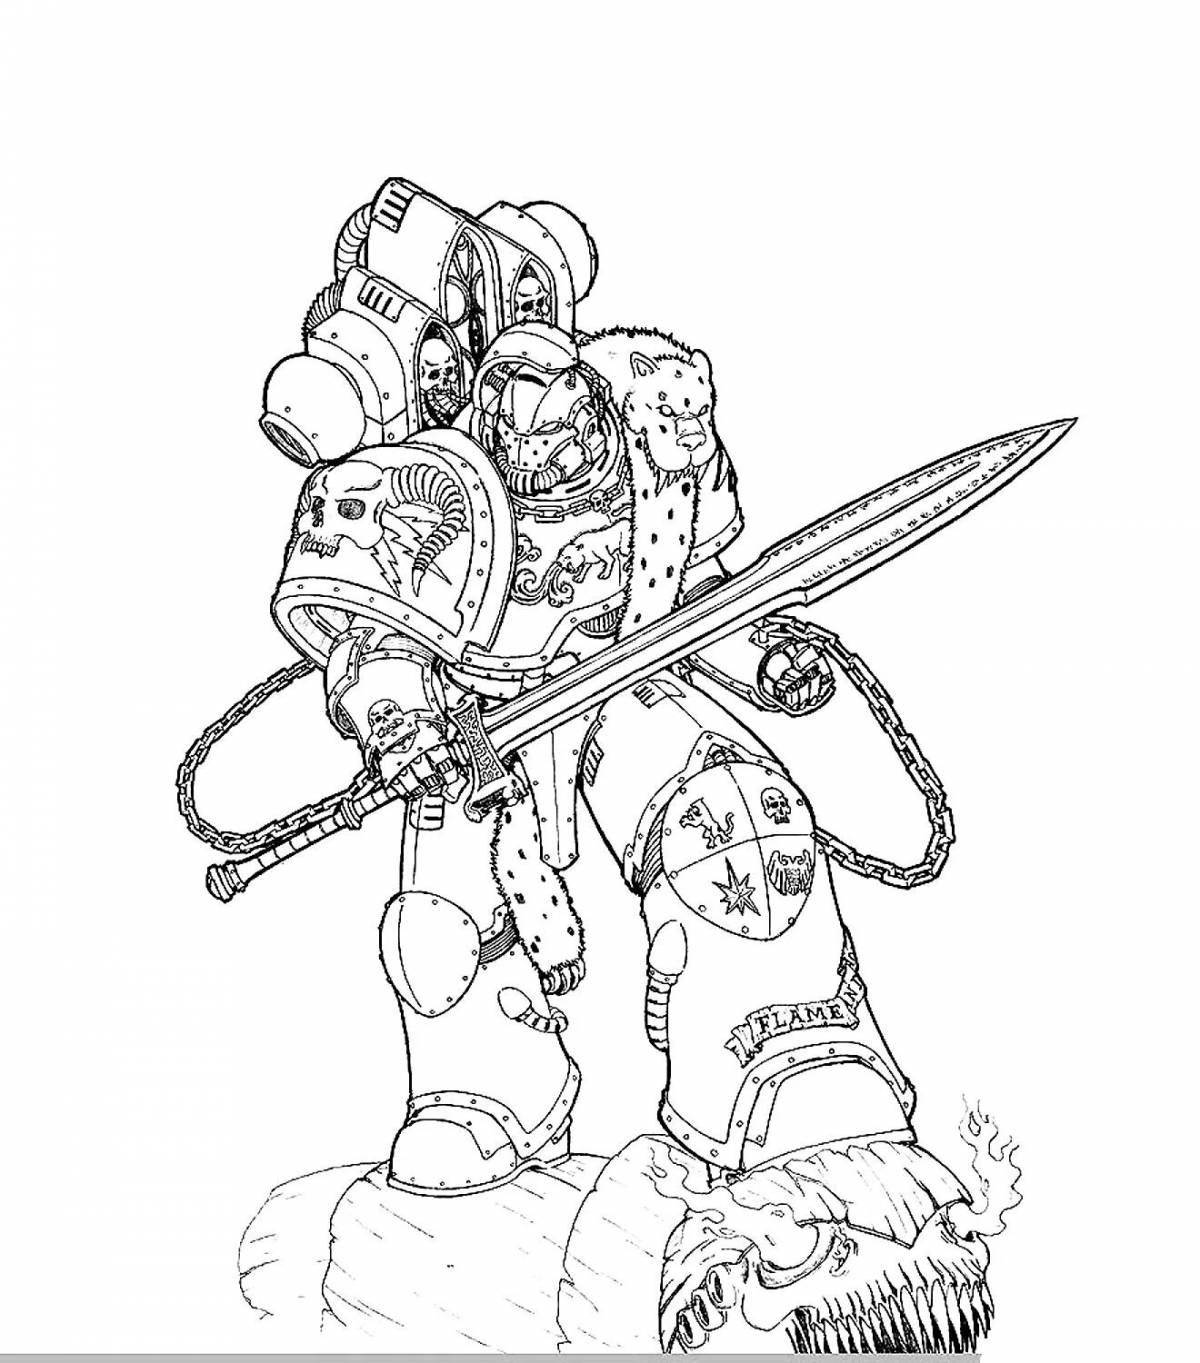 Warhammer 40000 majesty coloring page